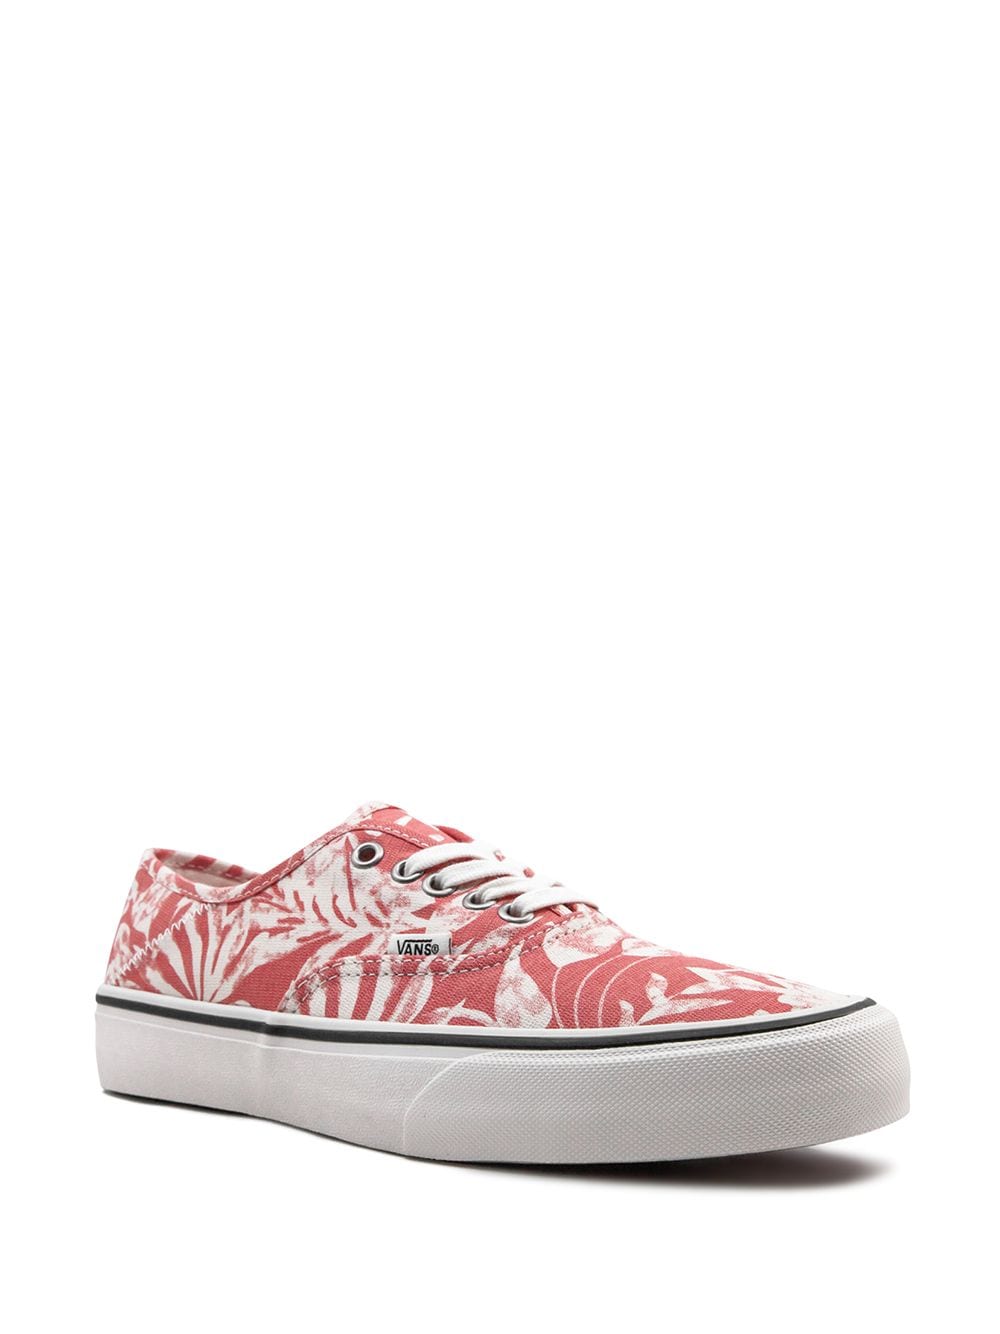 Vans Authentic SF Sneakers - Farfetch